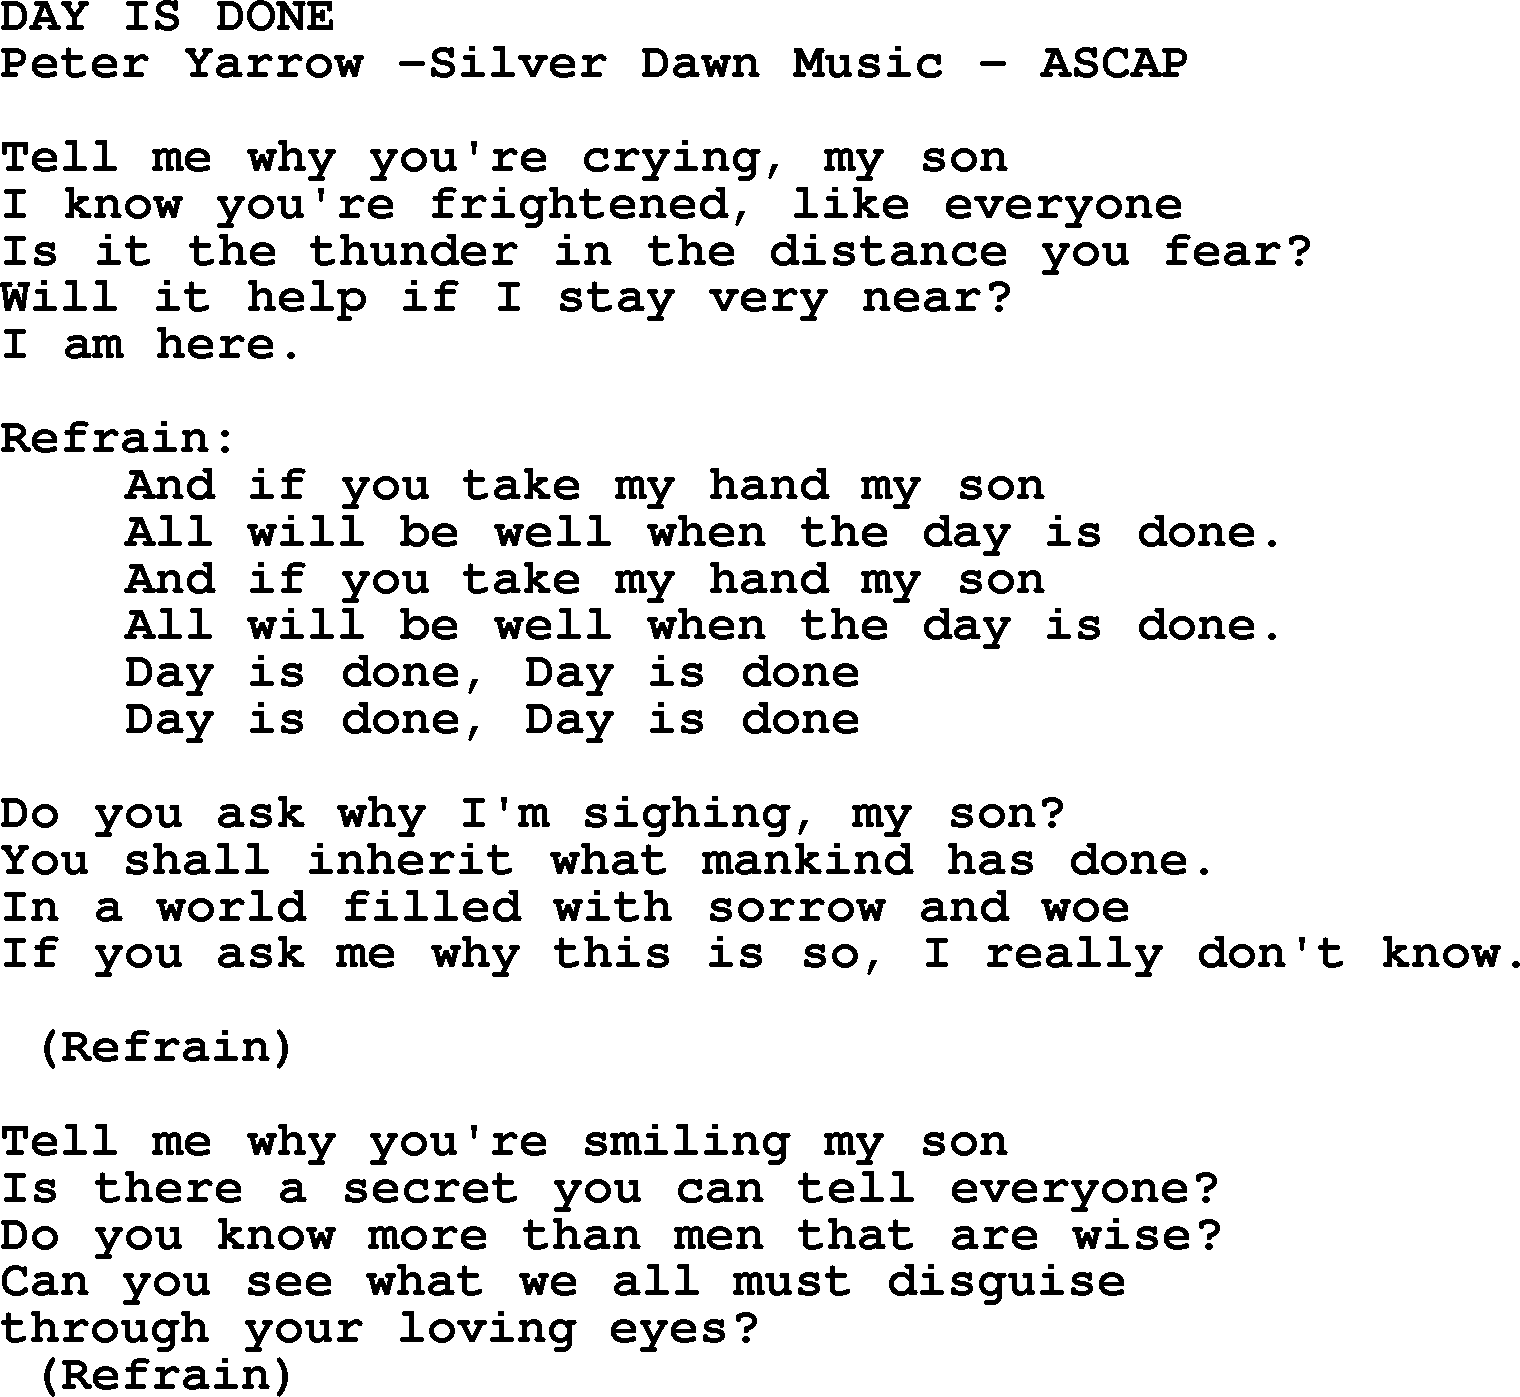 Peter, Paul and Mary song Day Is Done lyrics